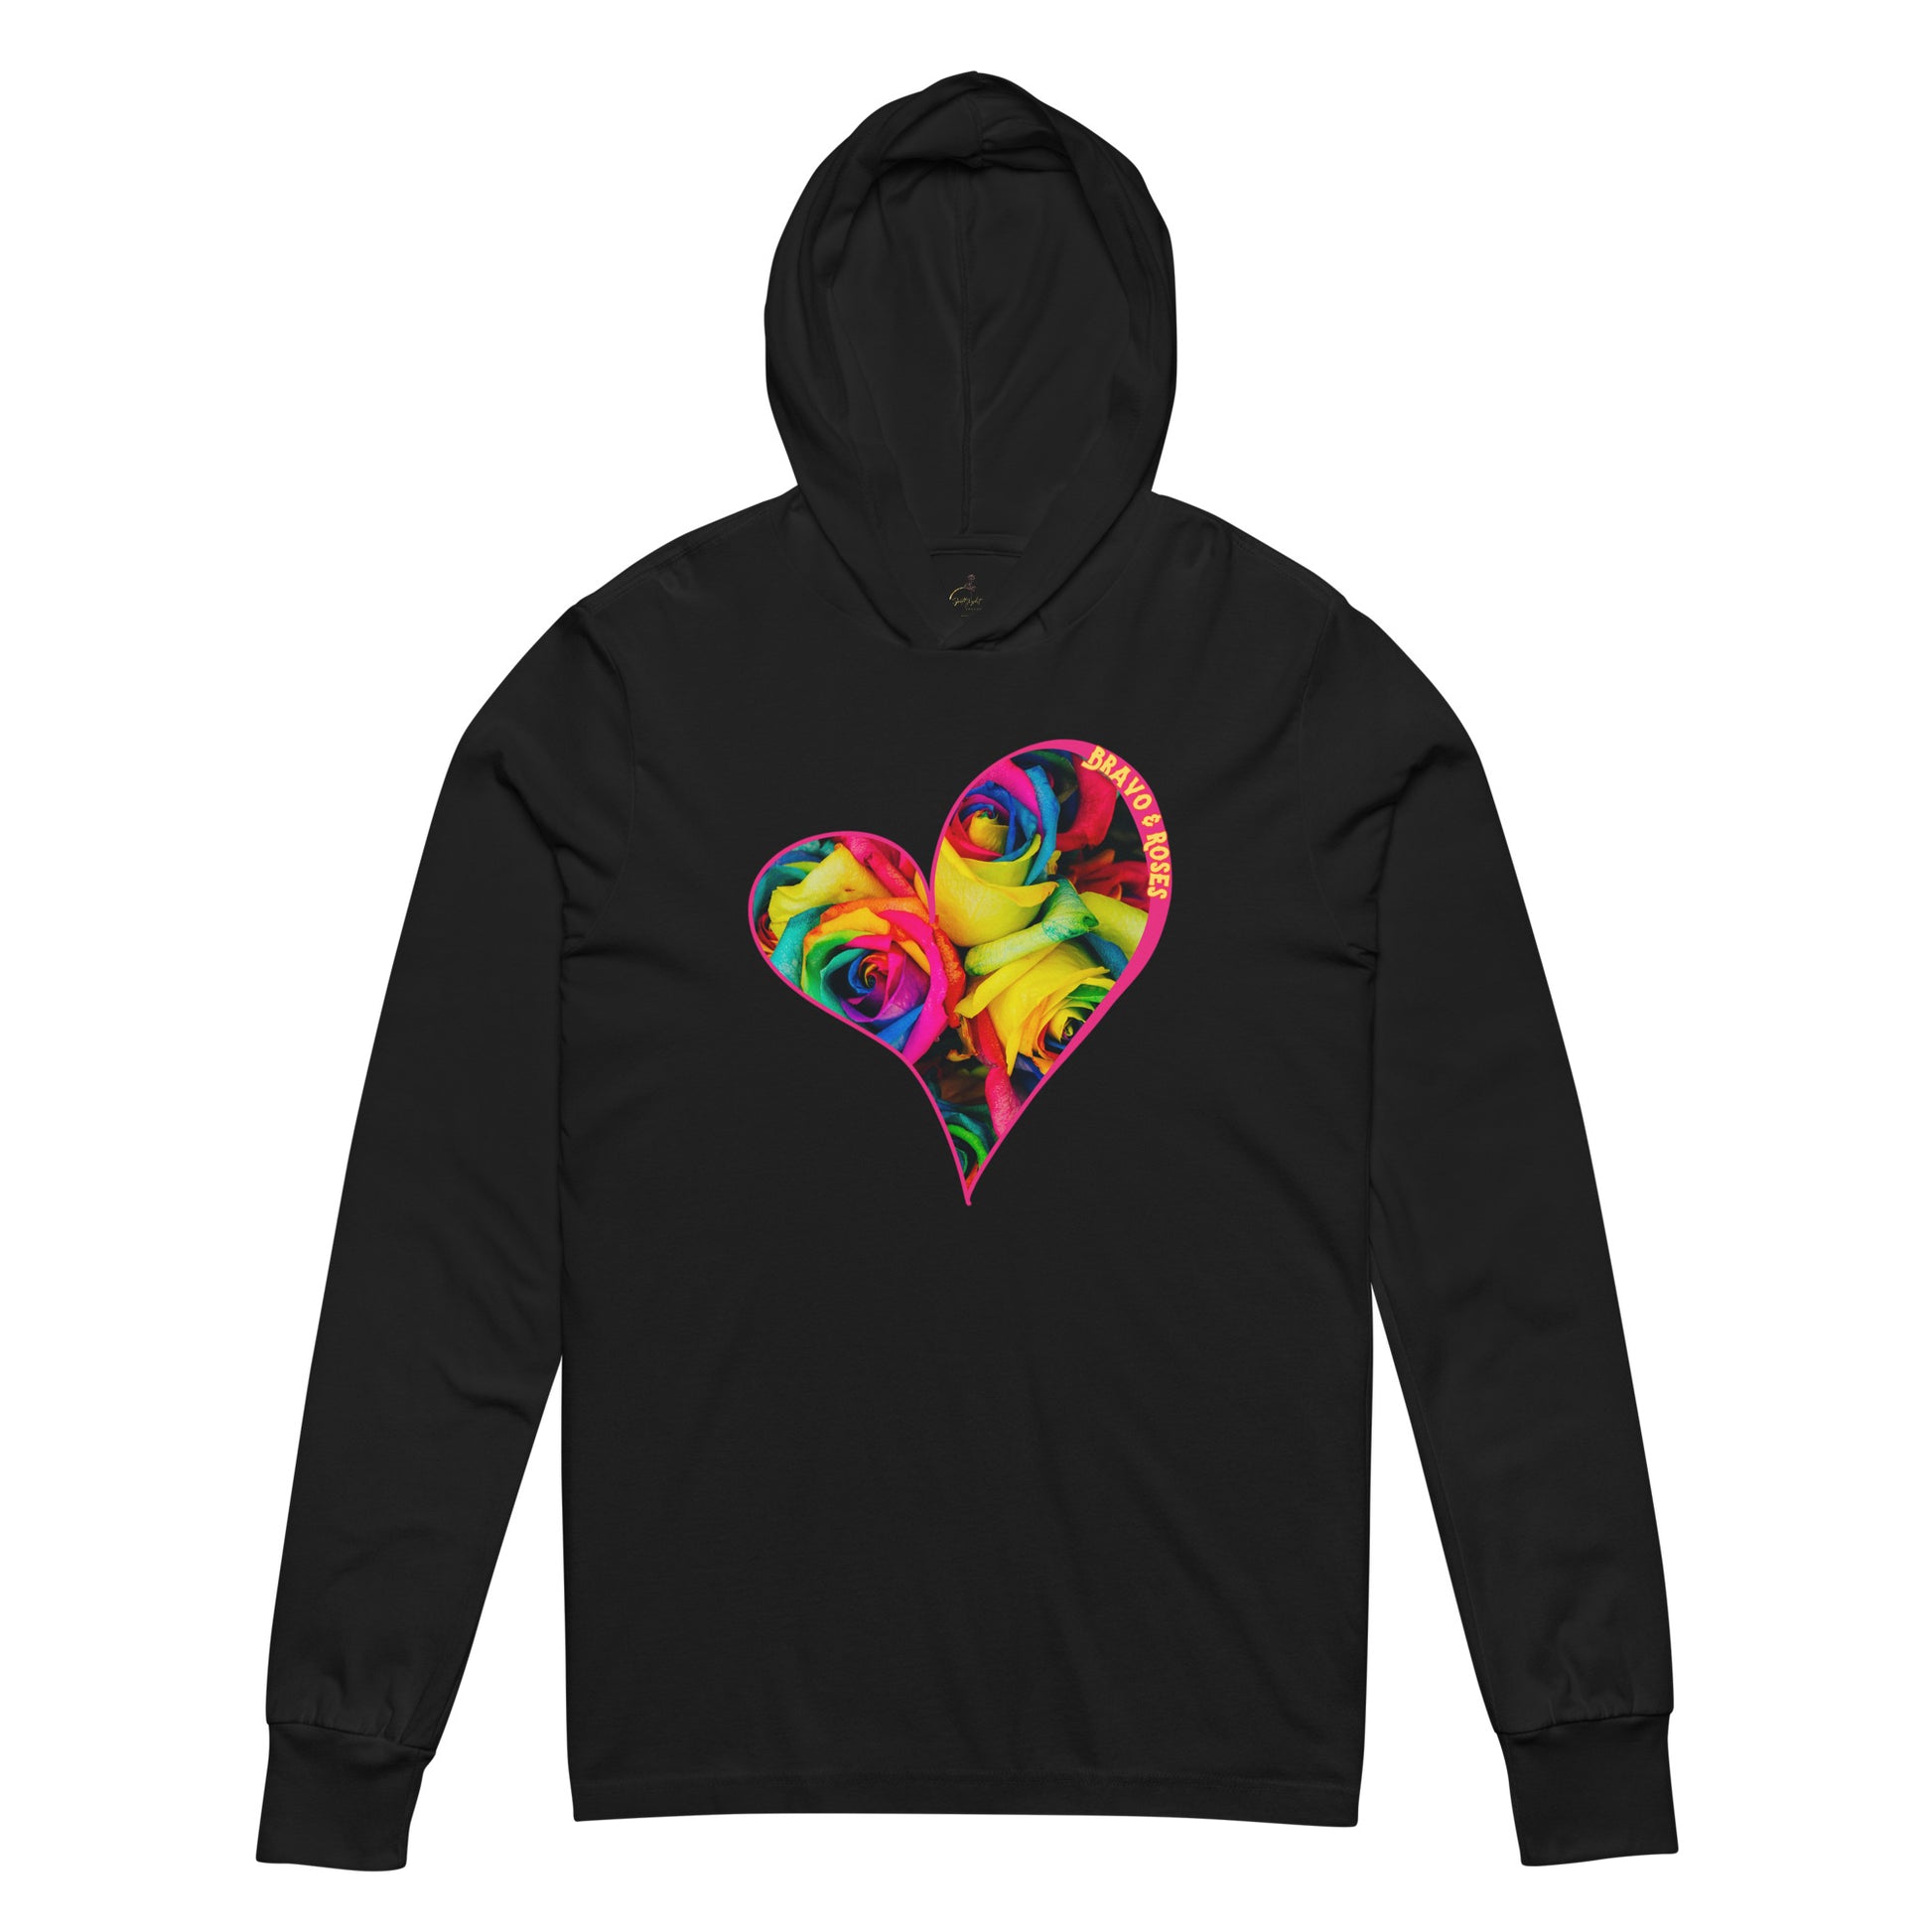 Bravo & Roses Hooded Long-Sleeve Tee - Bouquet: A stylish and comfortable hooded tee, because artists deserve praise. Featuring intricate designs and vibrant colors, it's perfect for expressing your unique fashion sense.